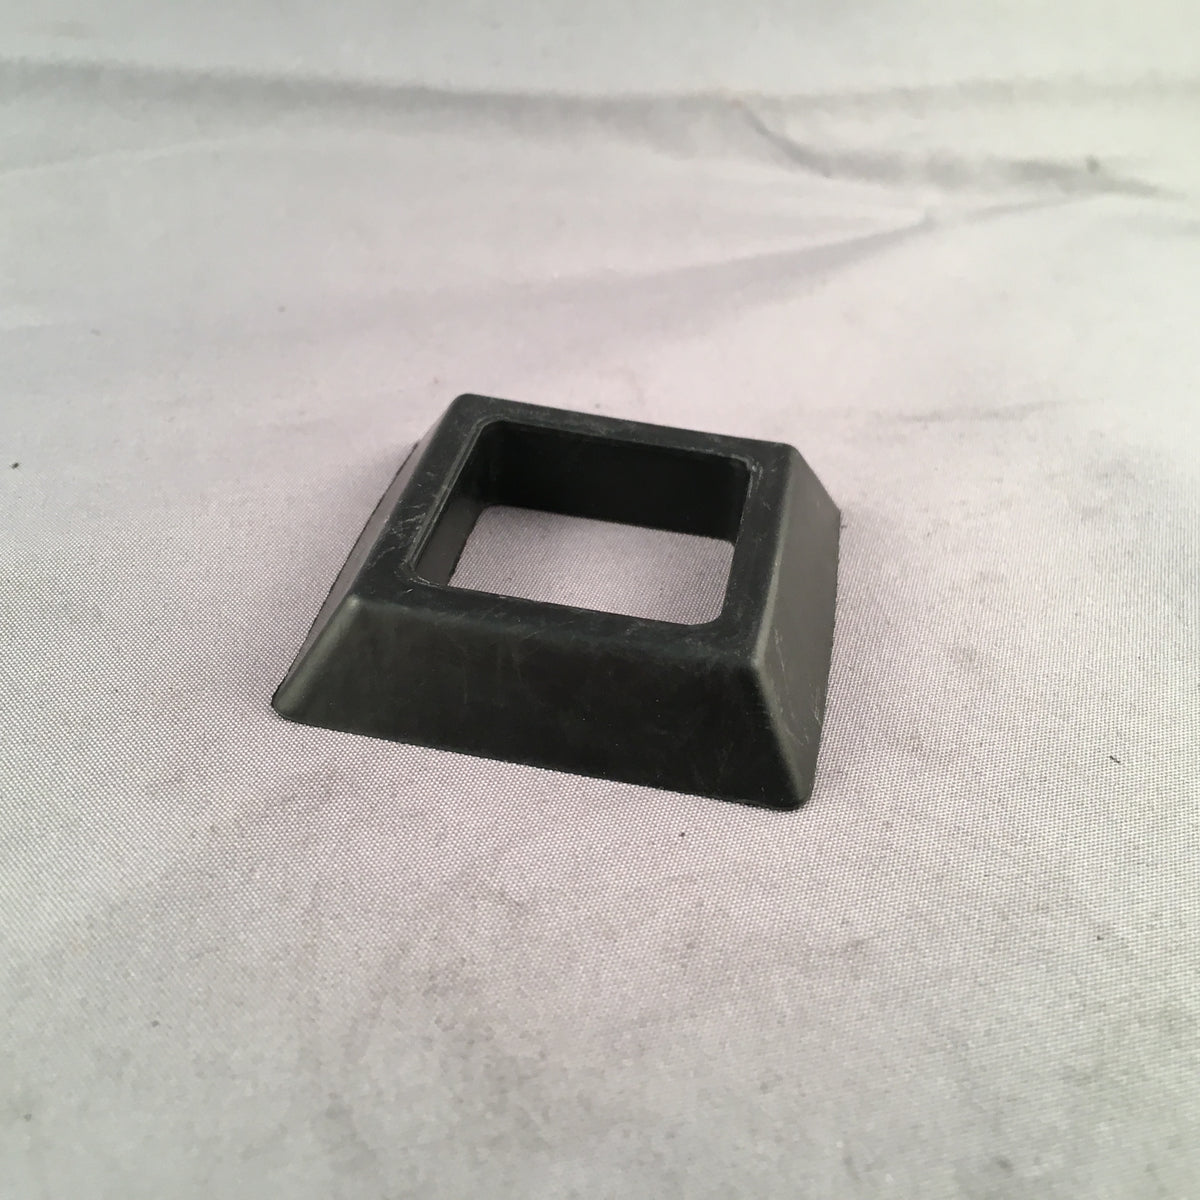 EMC GASKET, RUBBER SQUARE SHAPED